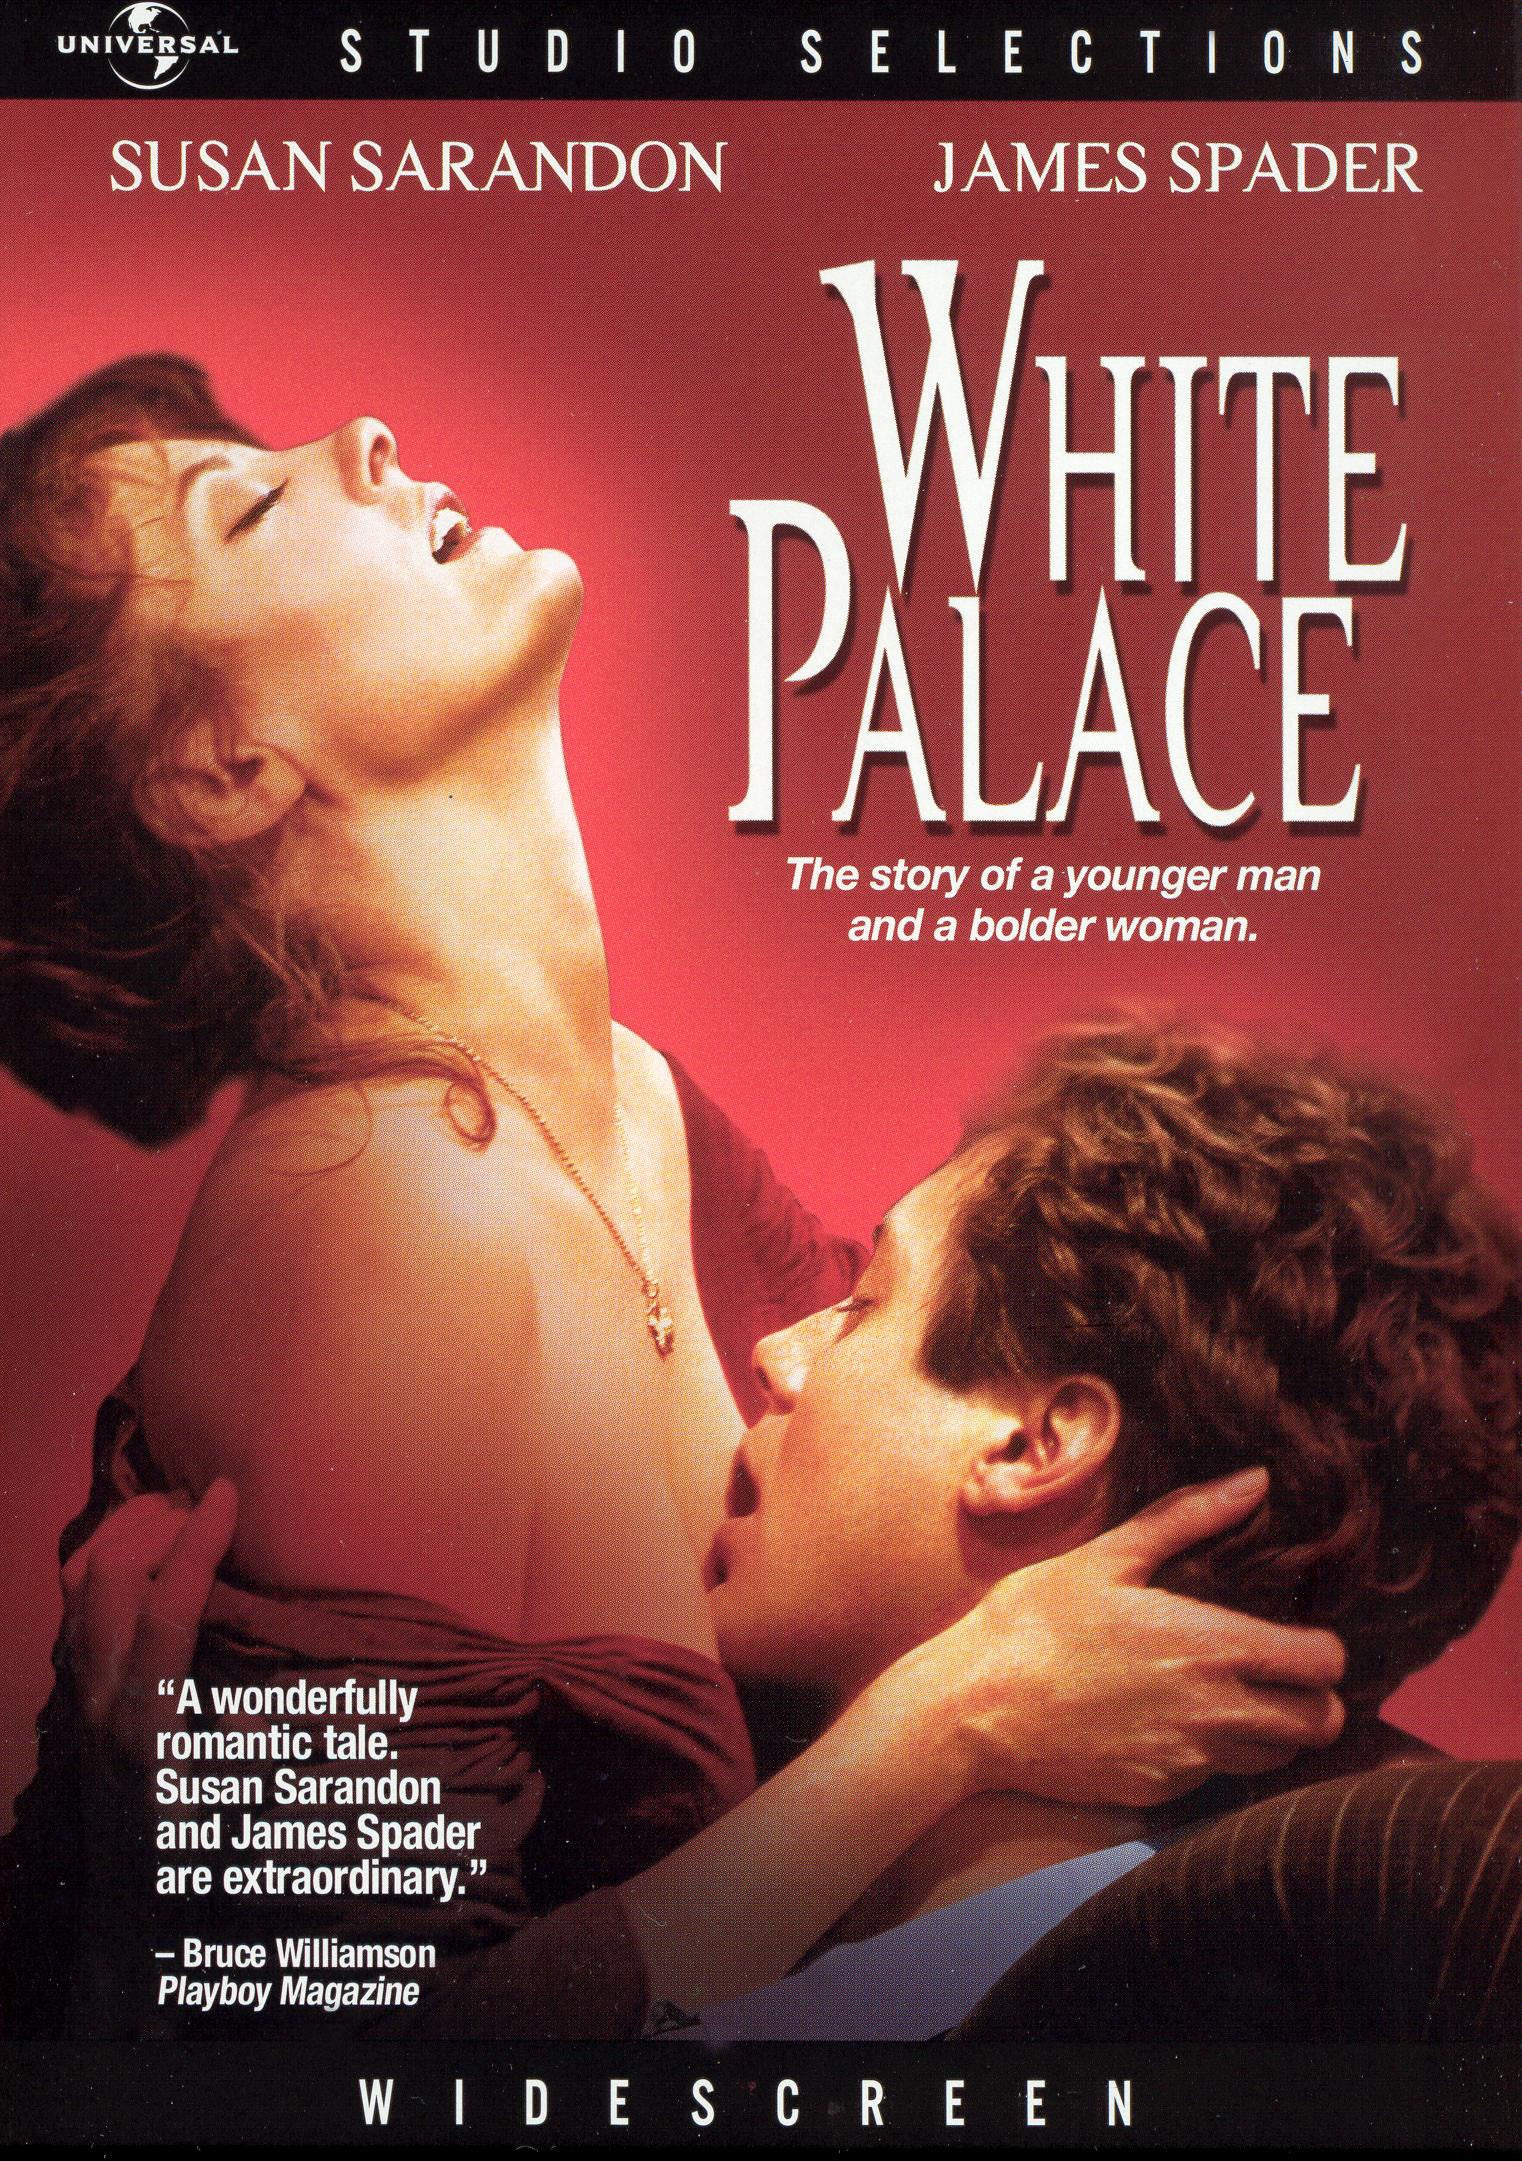 White Palace (Usa Import) cover art